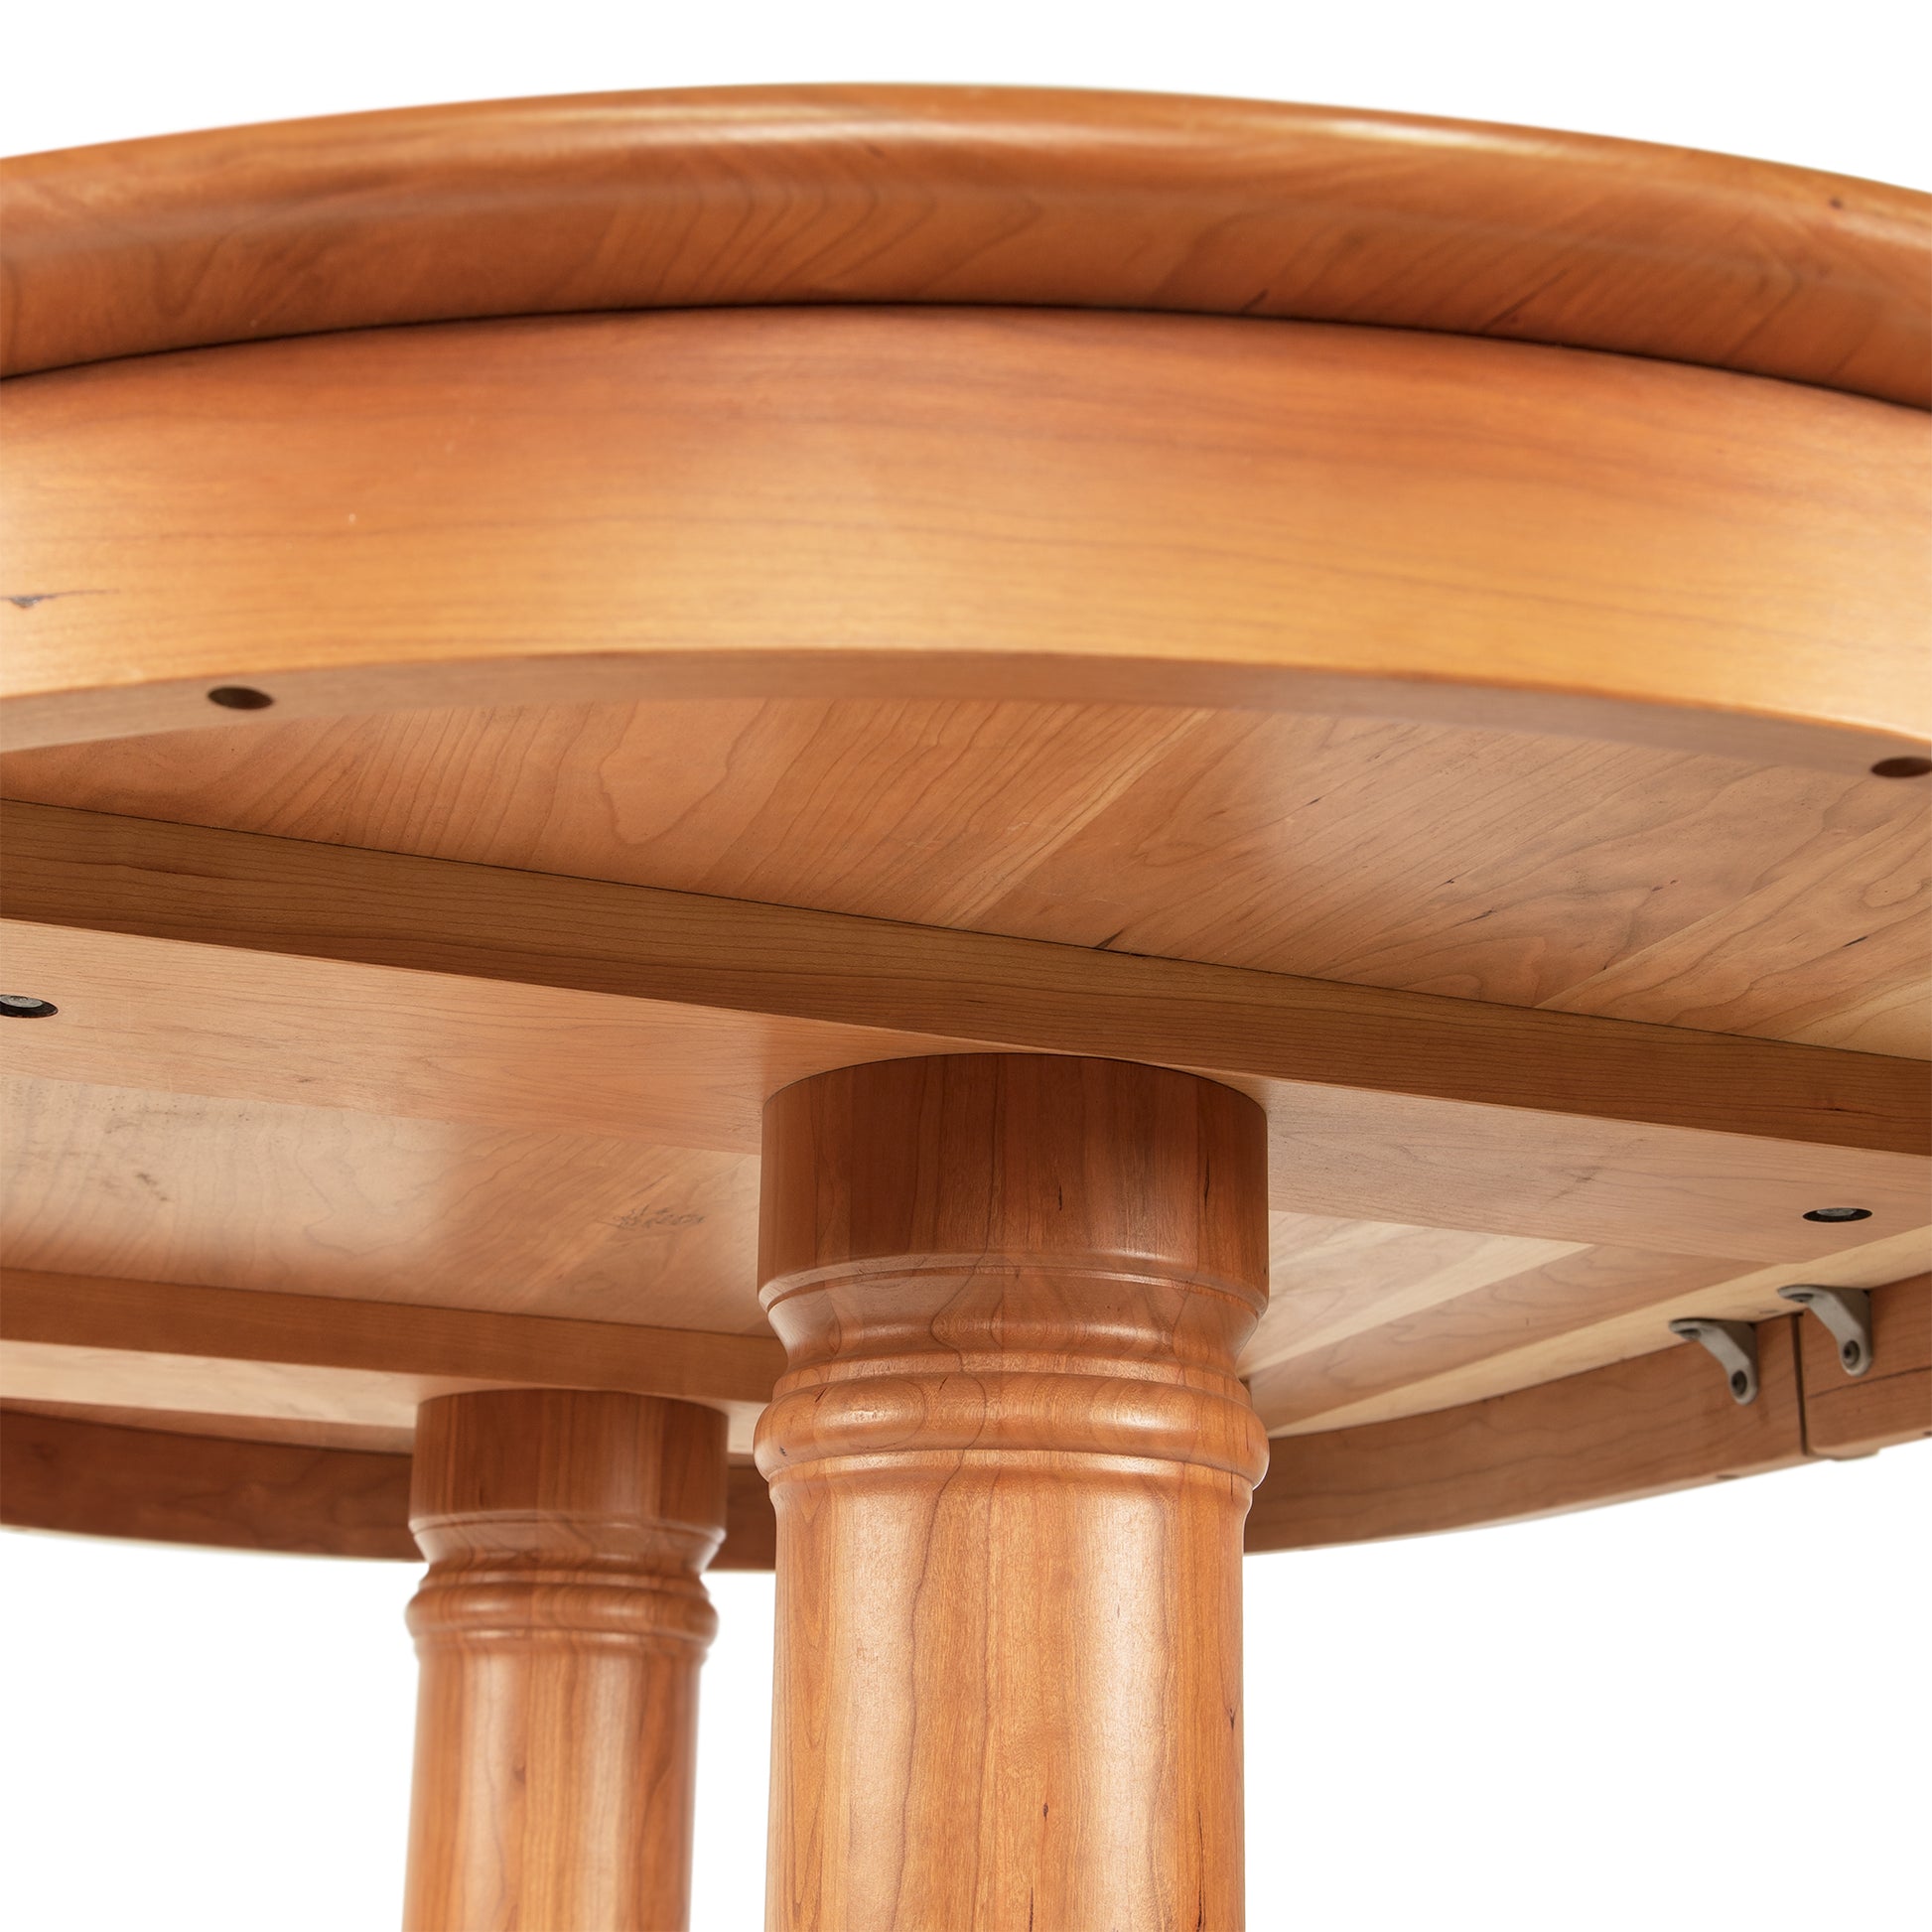 The Cabriole Oval Double Pedestal Solid Top Table with claw feet from Lyndon Furniture.